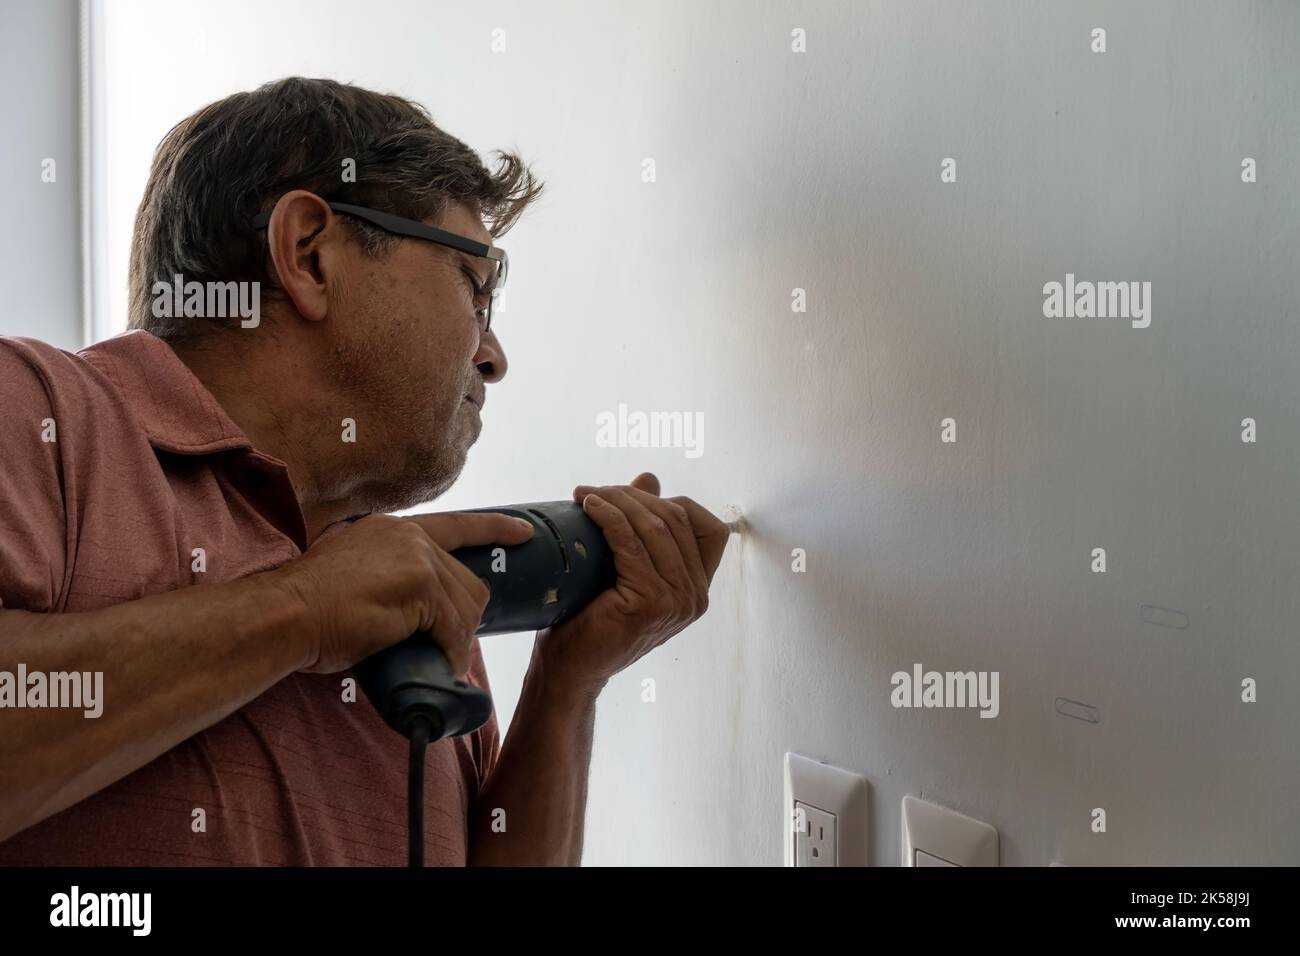 latino man using a power drill to drill holes in the wall to hang a new television, drilling holes in the wall, mexican, hispanic Stock Photo